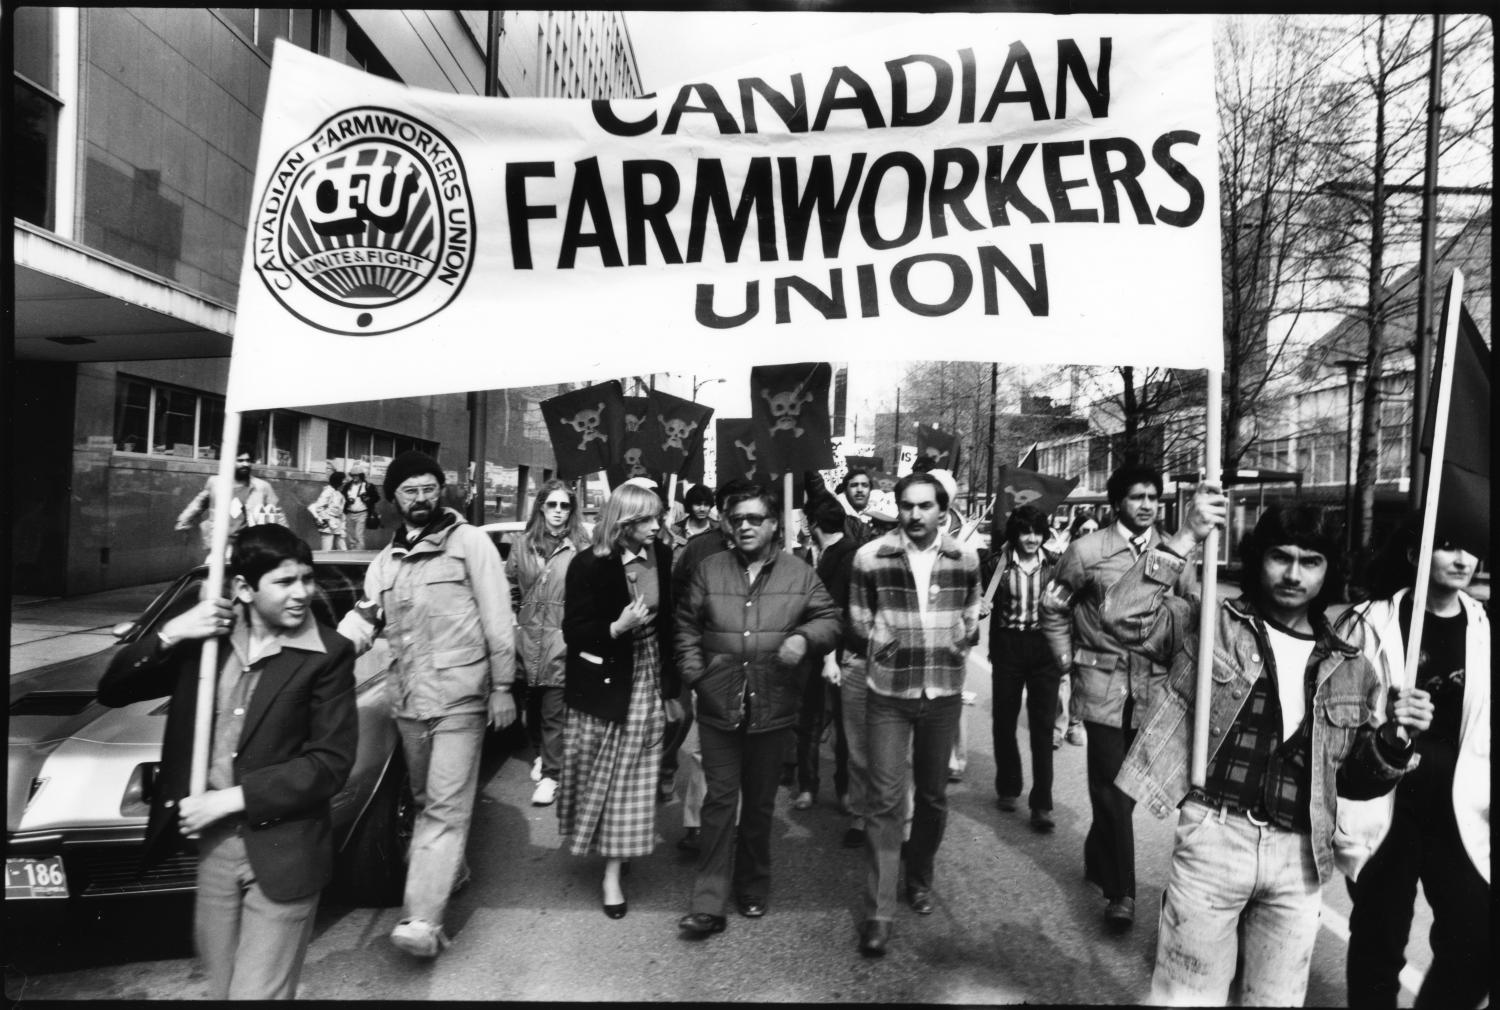 The legendary union leader Cesar Chavez, president of the United Farm Workers’ of America (UFW) (center left) and Raj Chouhan, founding president of the Canadian Farmworkers’ Union (CFU) (center right) lead a major rally [...] on Cambie Street.